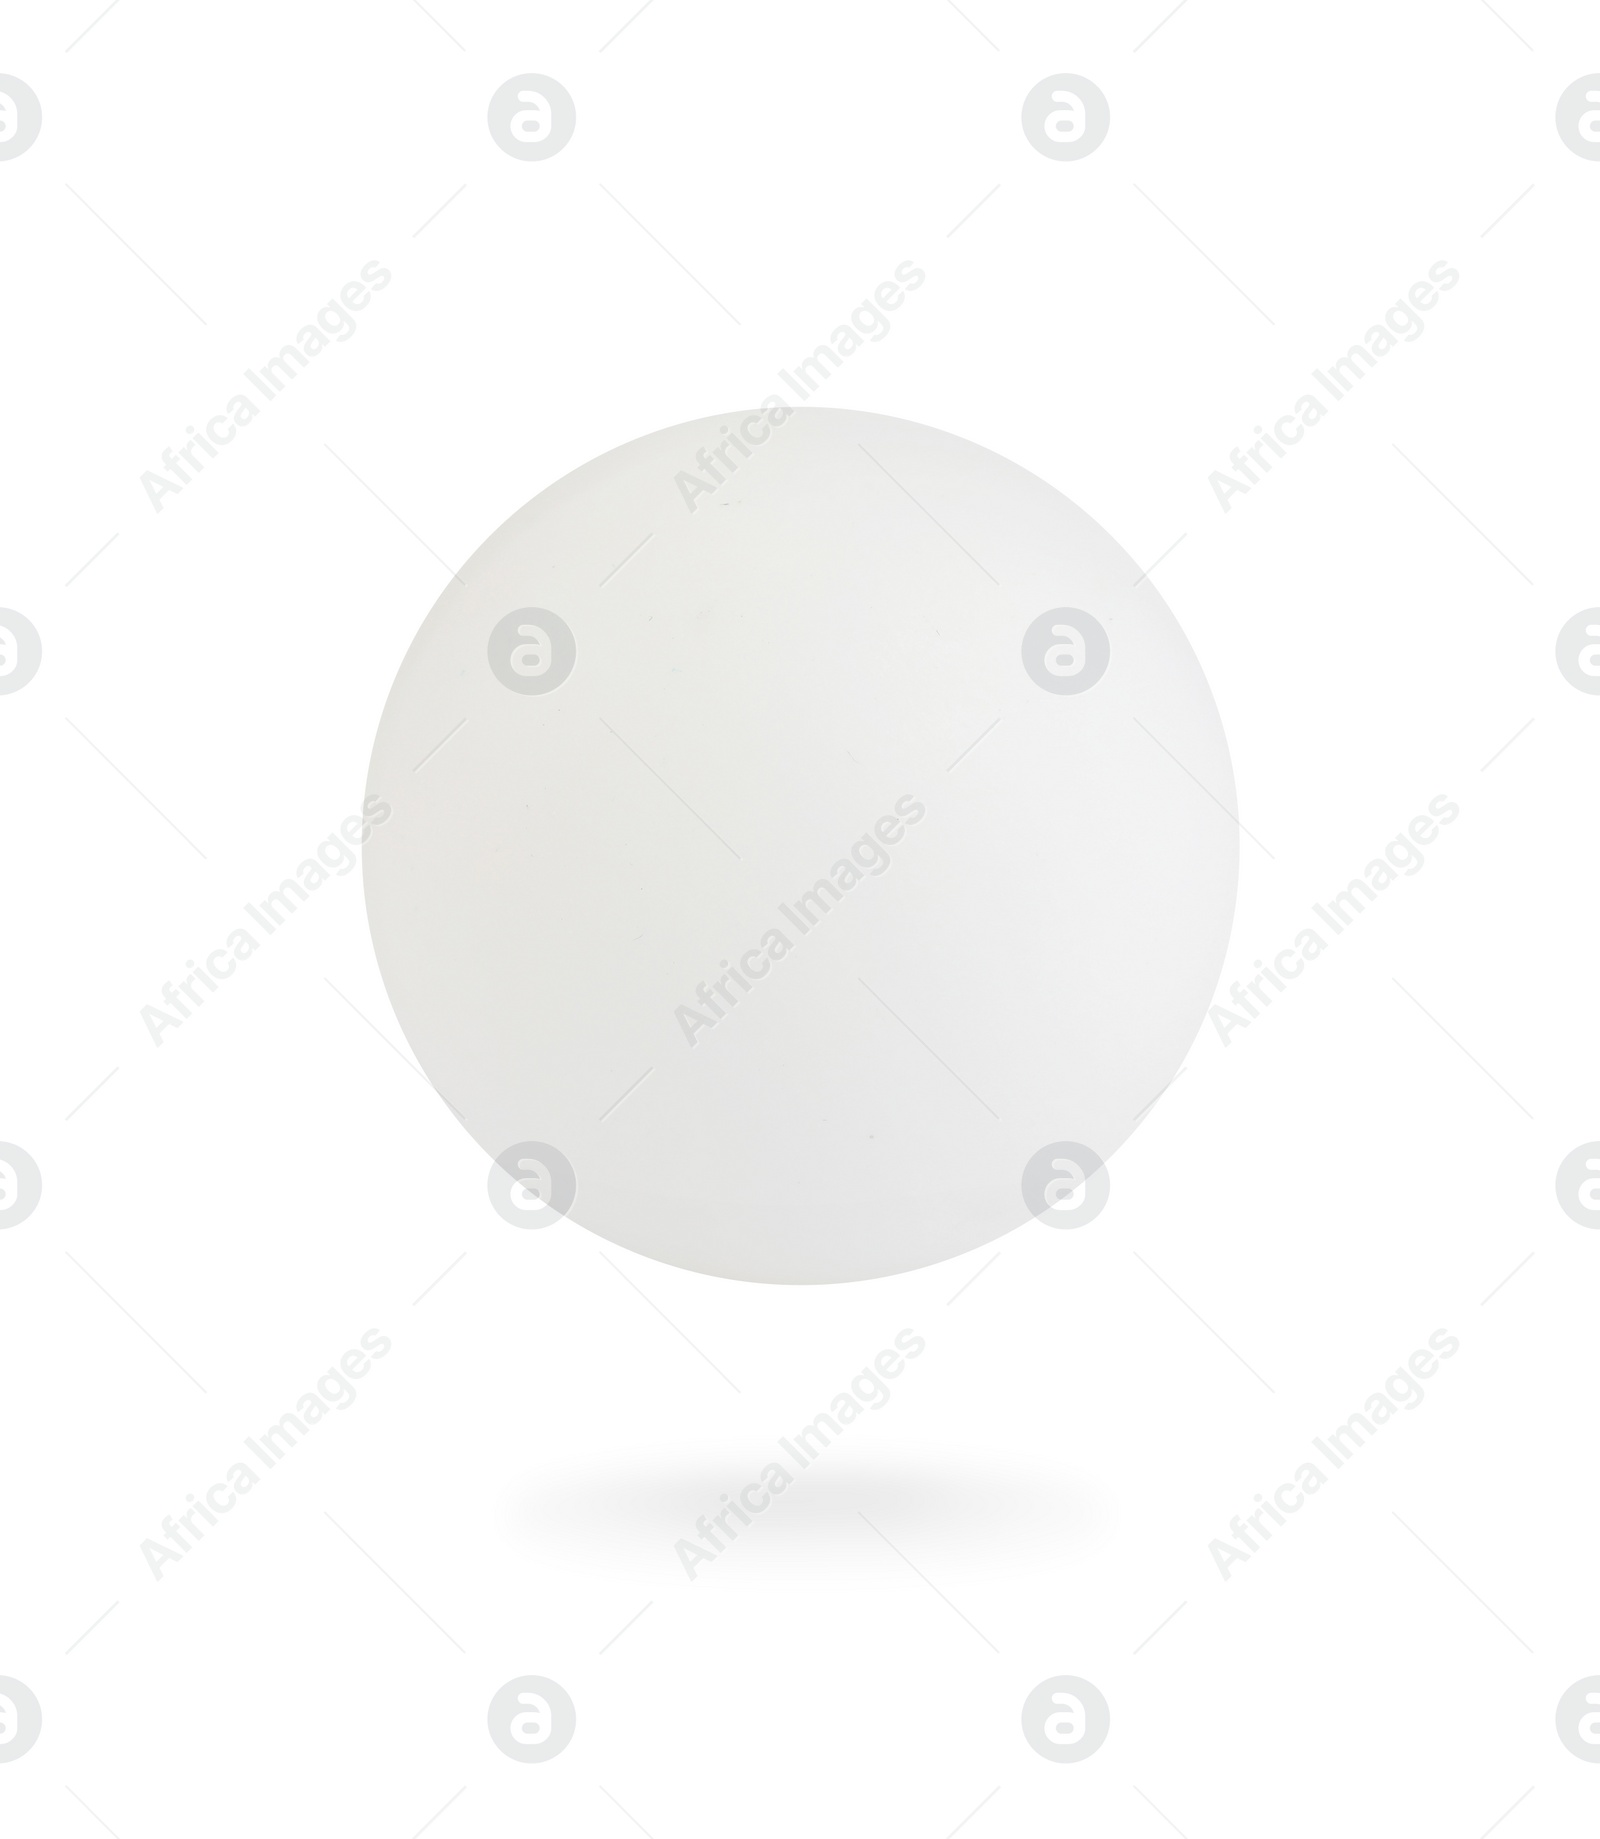 Image of Plastic ball for table tennis isolated on white